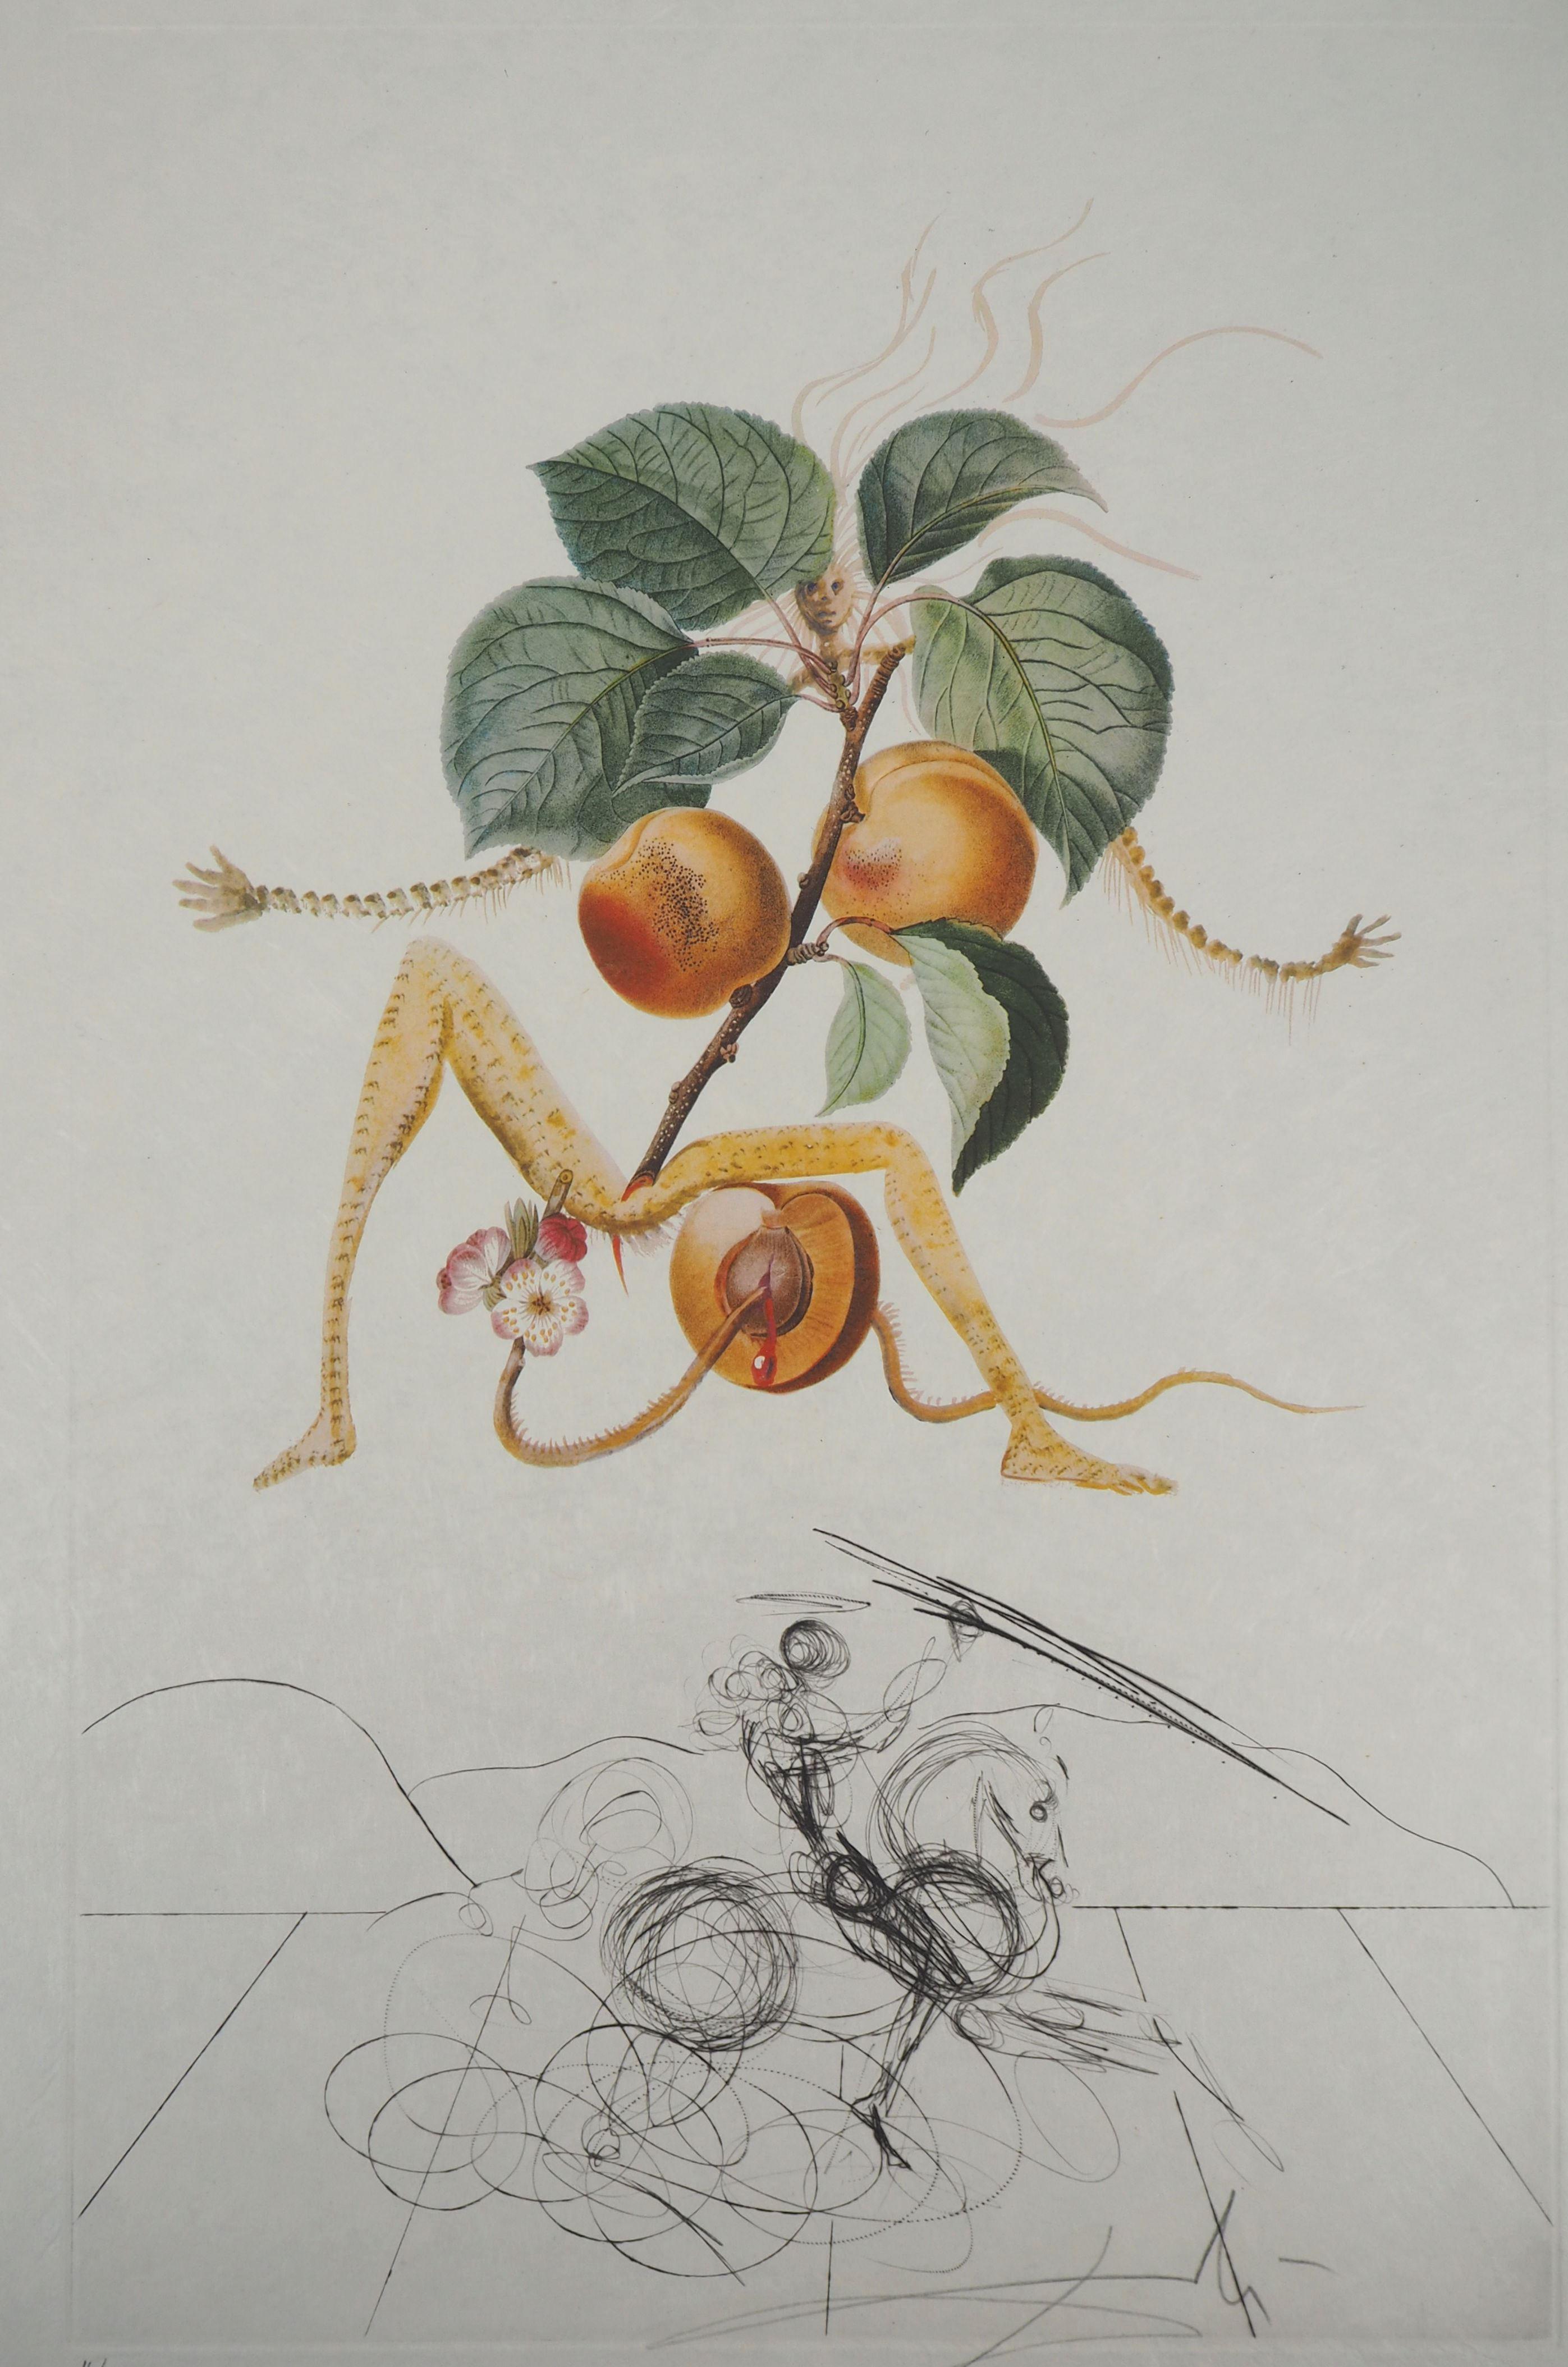 Flordali: Abricot Chevalier (Fruit) - Etching (Field 69-11D) - Surrealist Print by Salvador Dalí